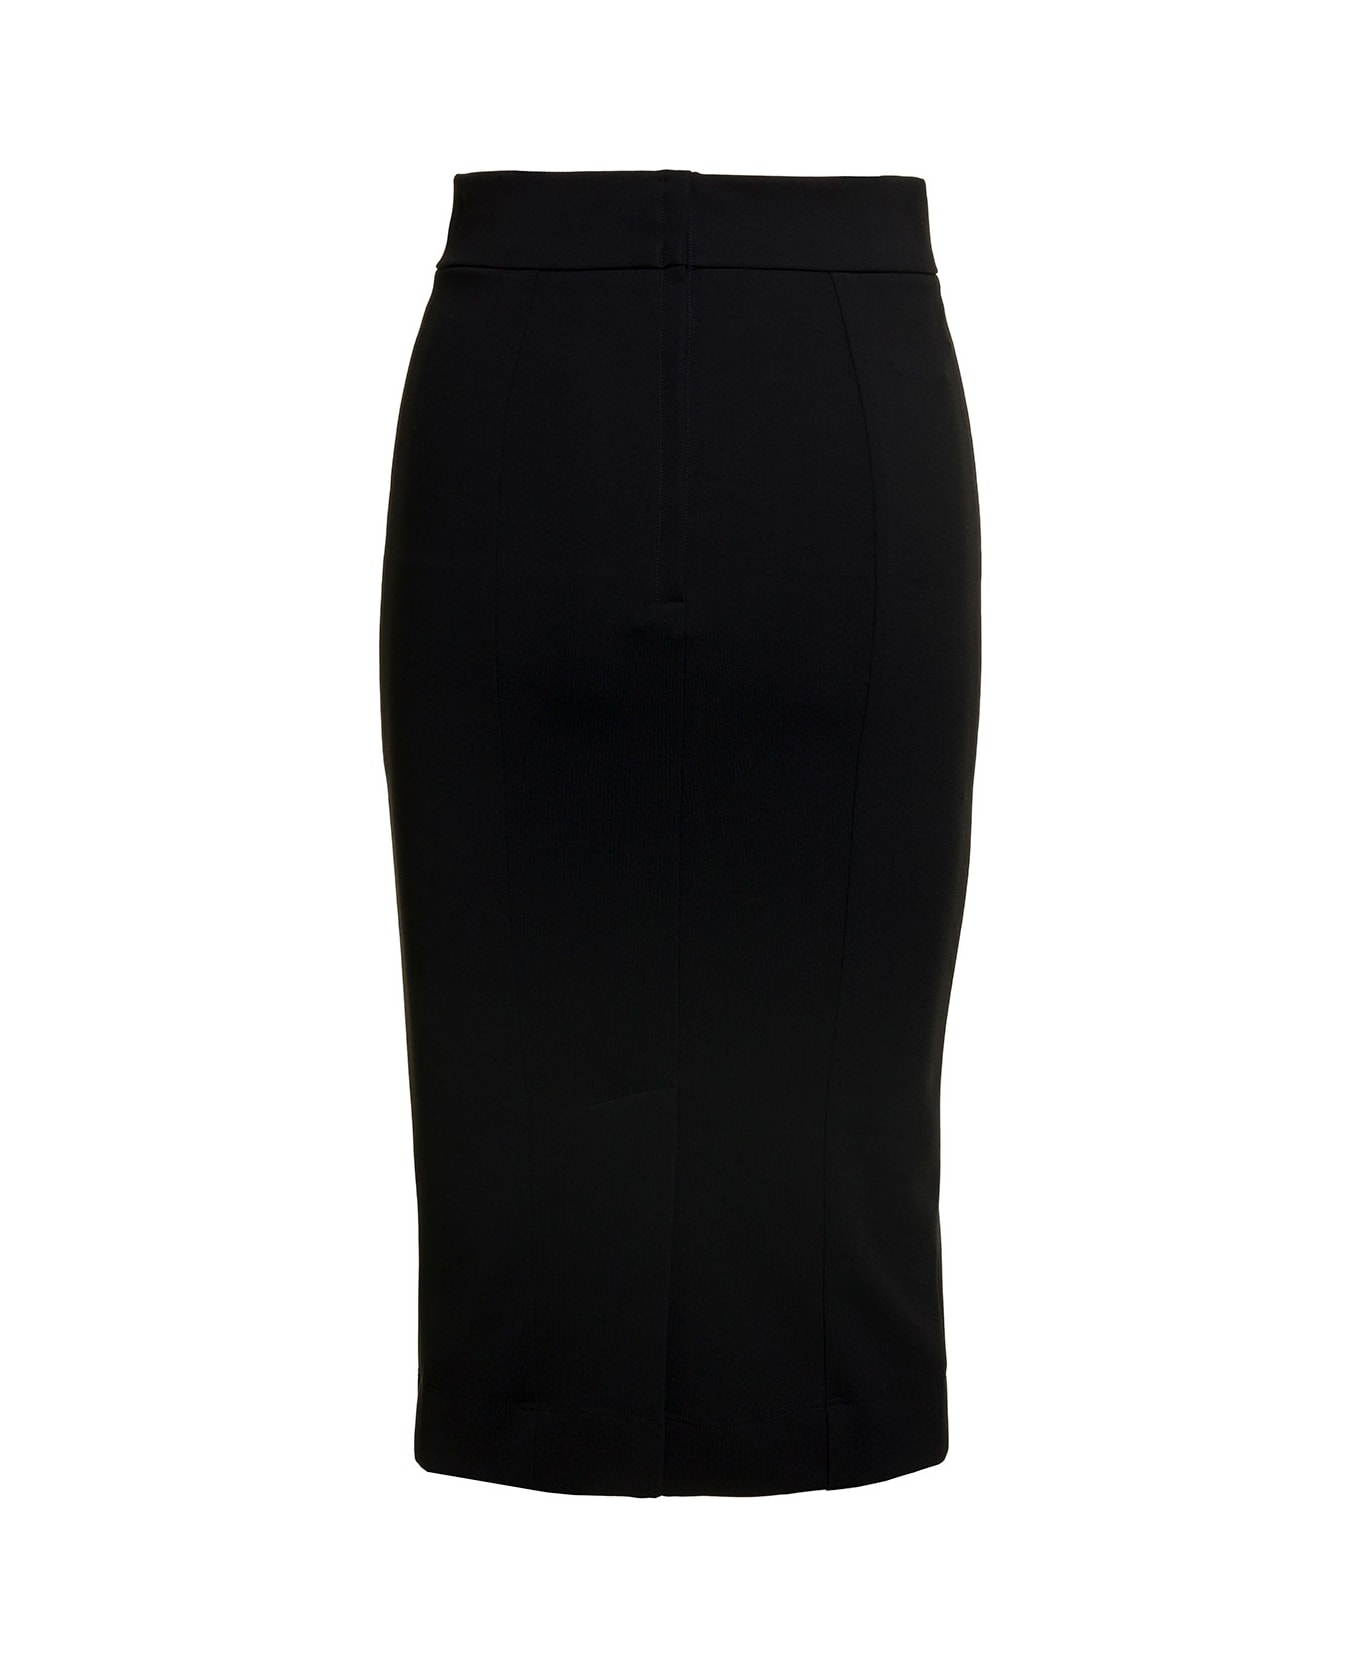 Dolce & Gabbana Midi Black Skirt With Quilted Detail In Fabric Woman - Black